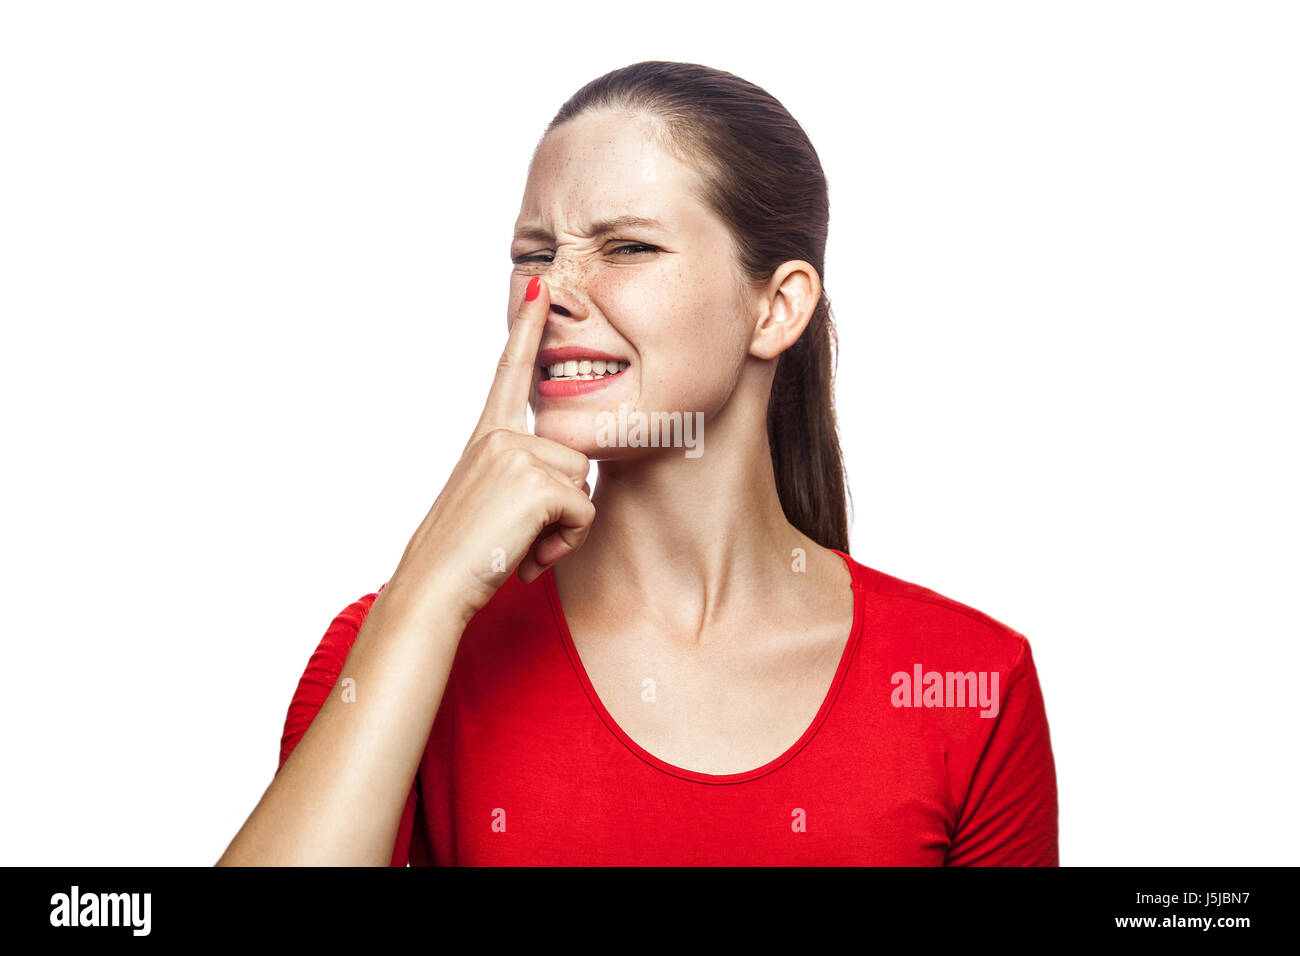 Portrait of liar woman in red t-shirt with freckles. looking up and touch her nose, studio shot. isolated on white background. Stock Photo